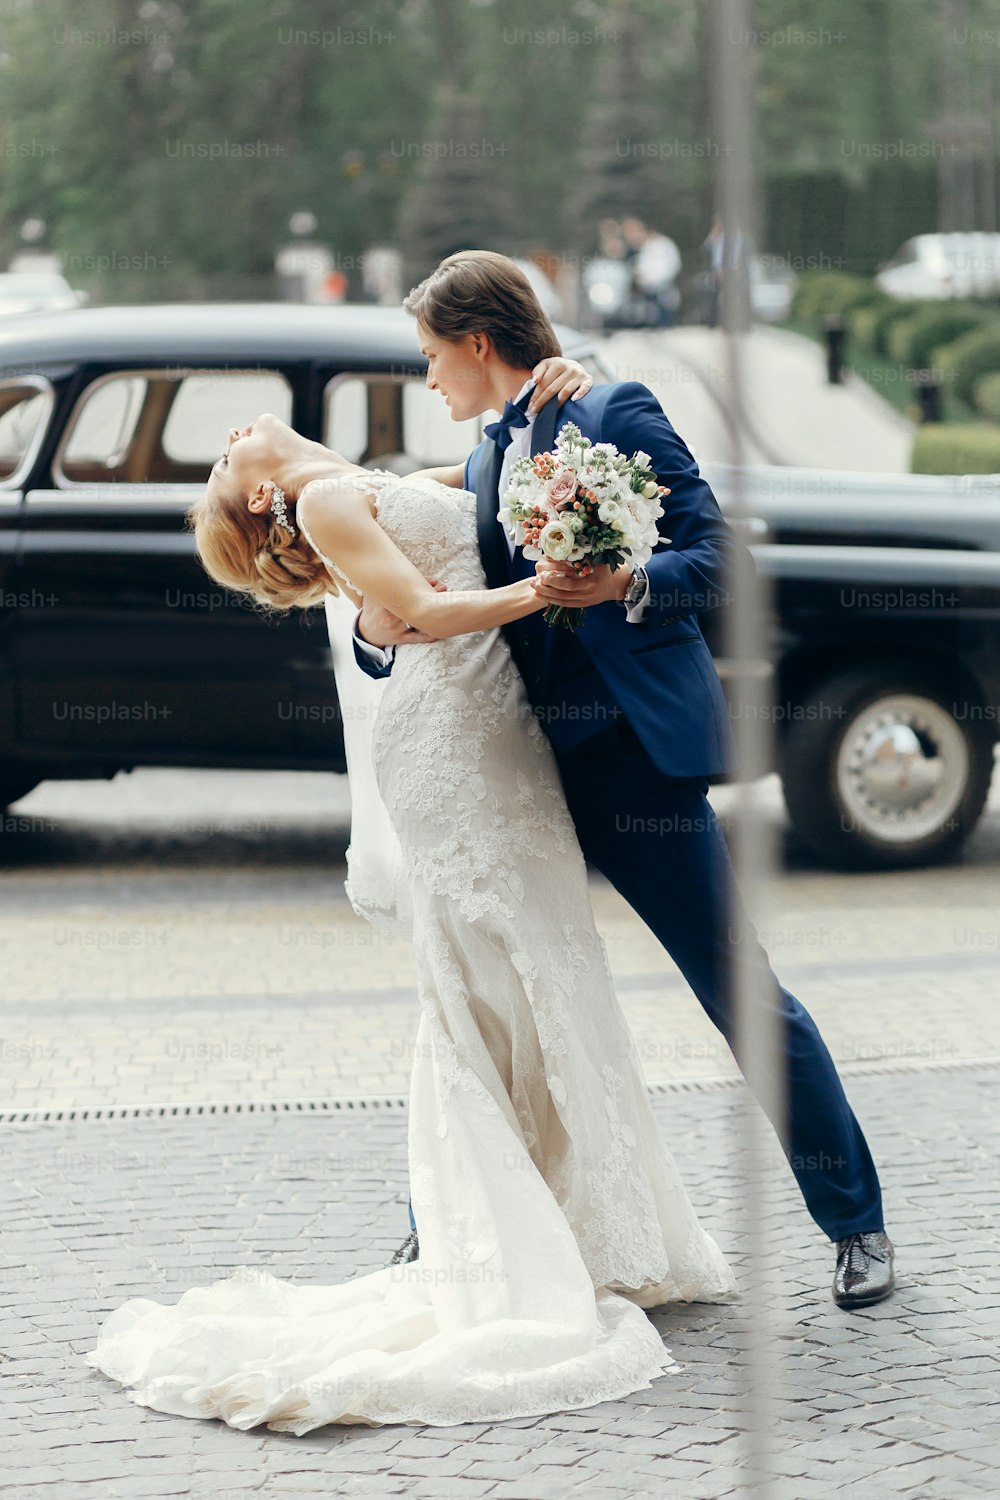 Romantic bride and groom portrait after wedding ceremony, happy newlywed couple dancing outdoors, luxury car in background, happy groom hugging bride